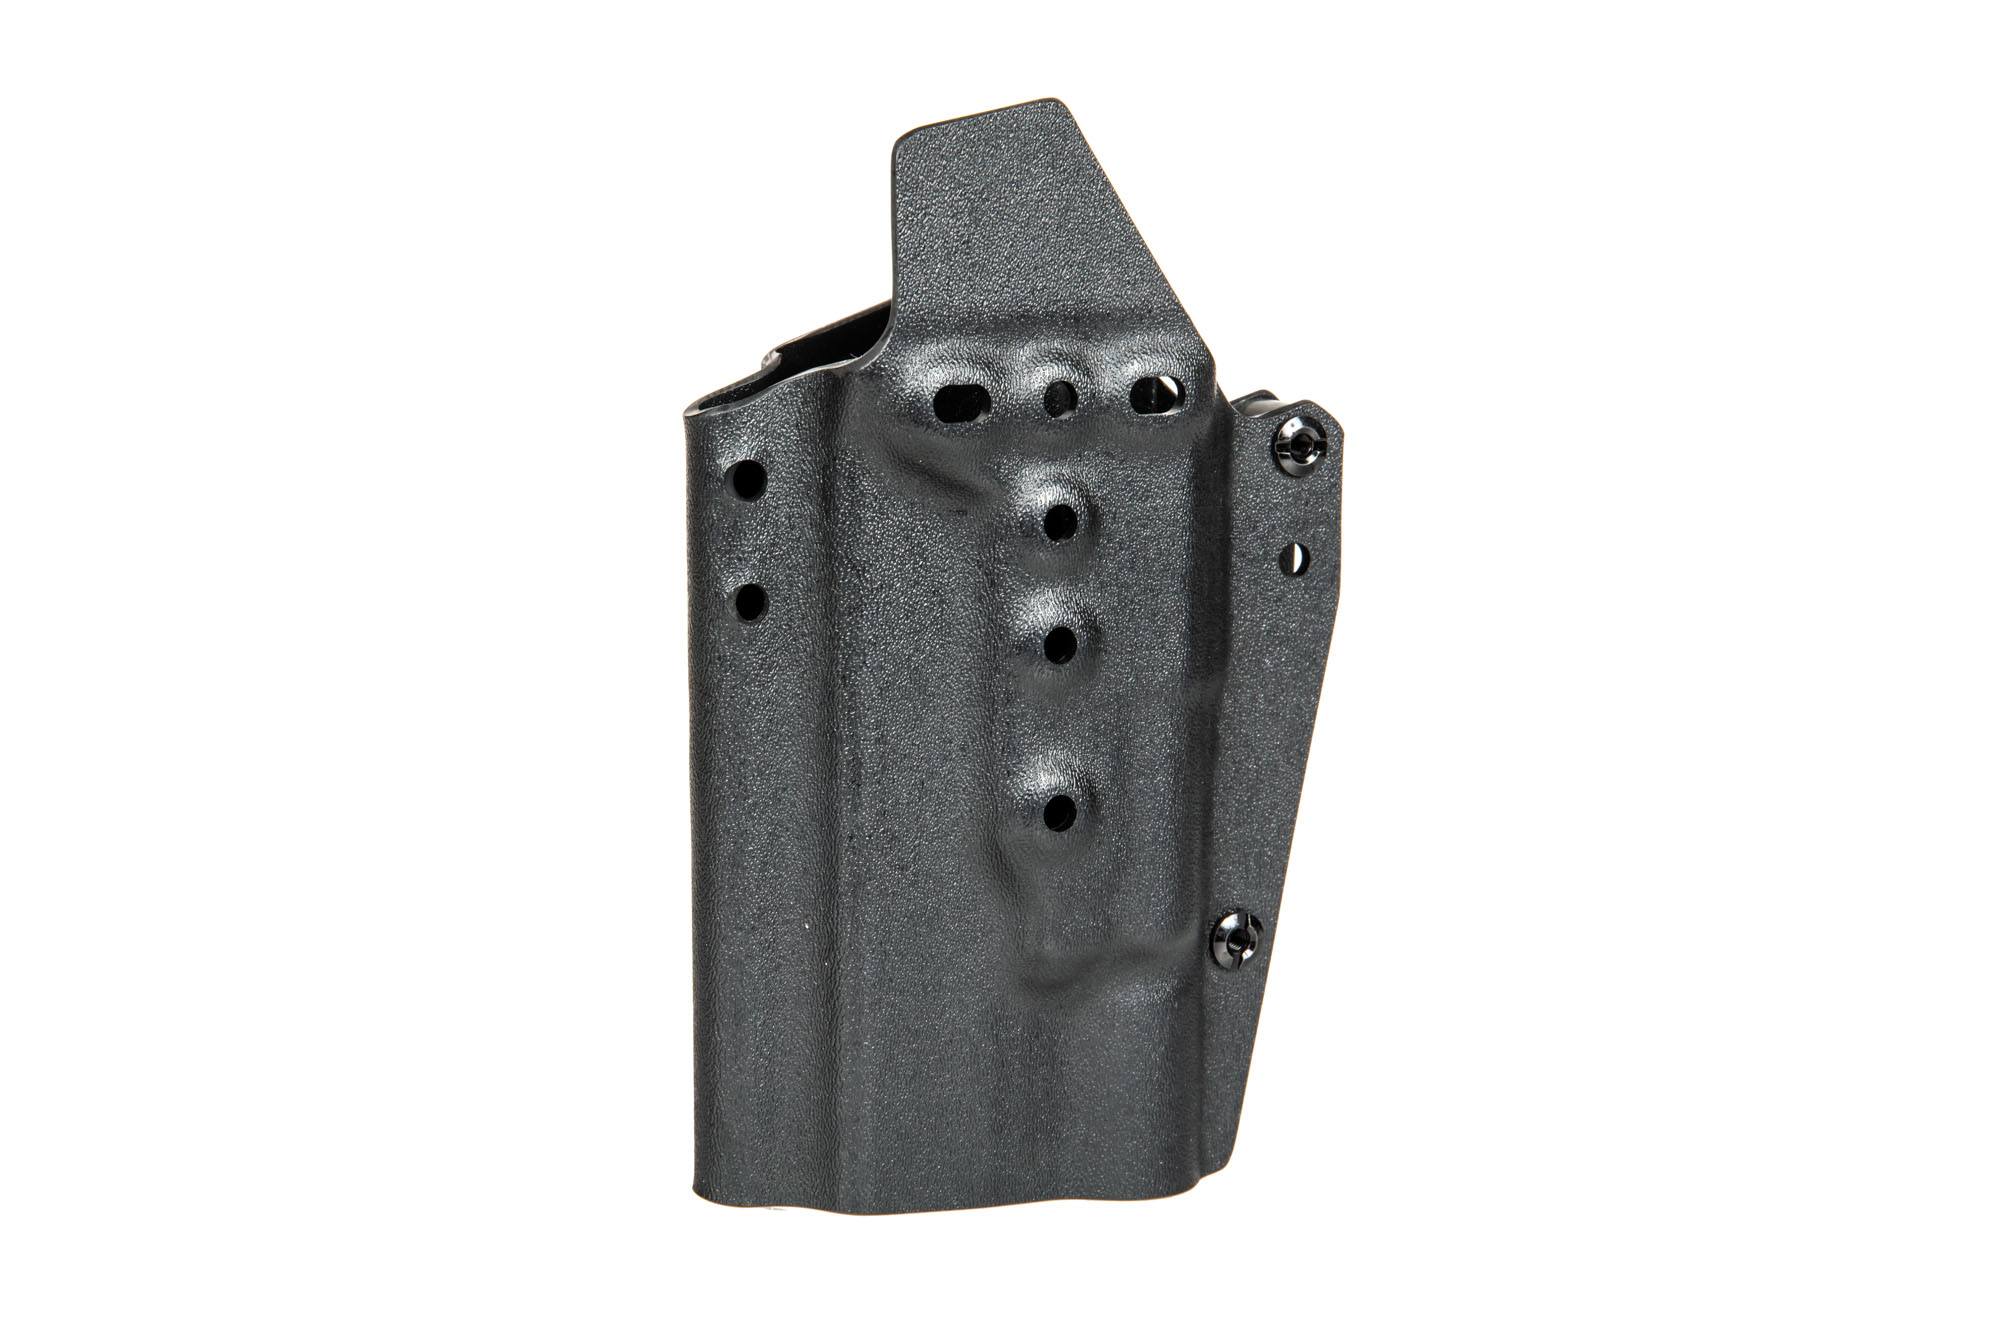 Kydex Holster for G17 replicas with X300 Flashlight - Black